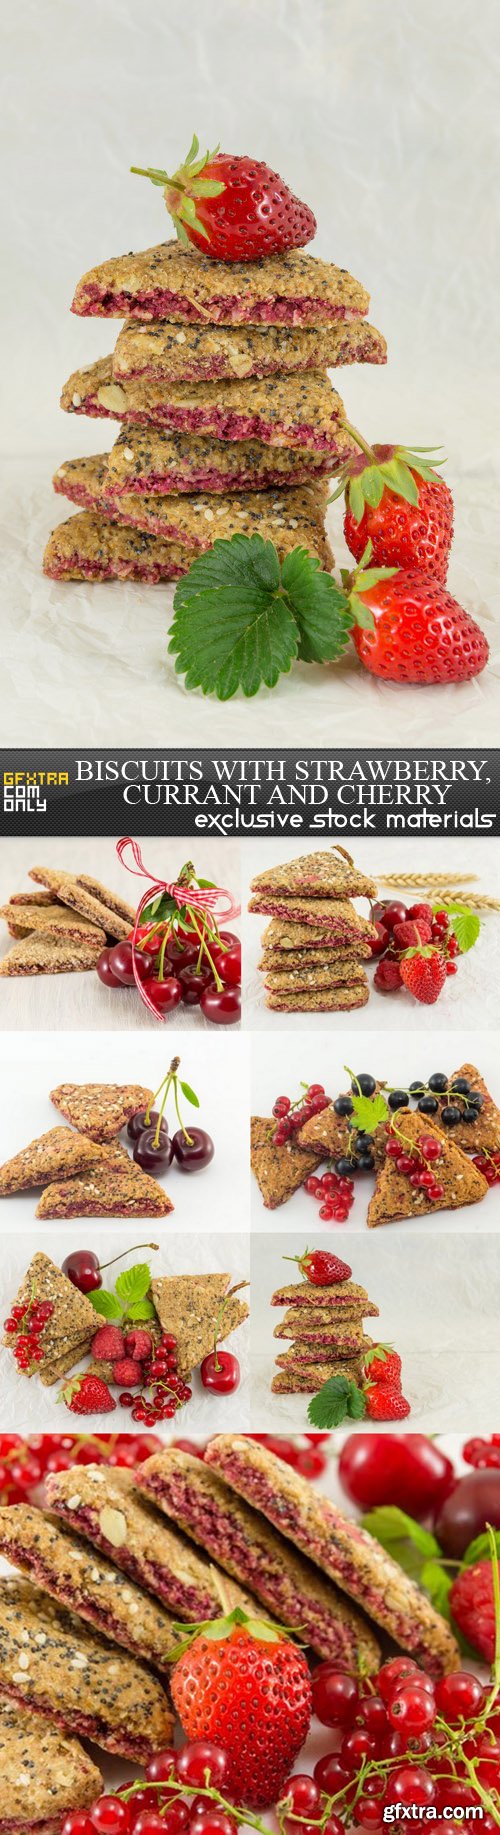 Biscuits with Strawberry, Currant and Cherry - 8 UHQ JPEG